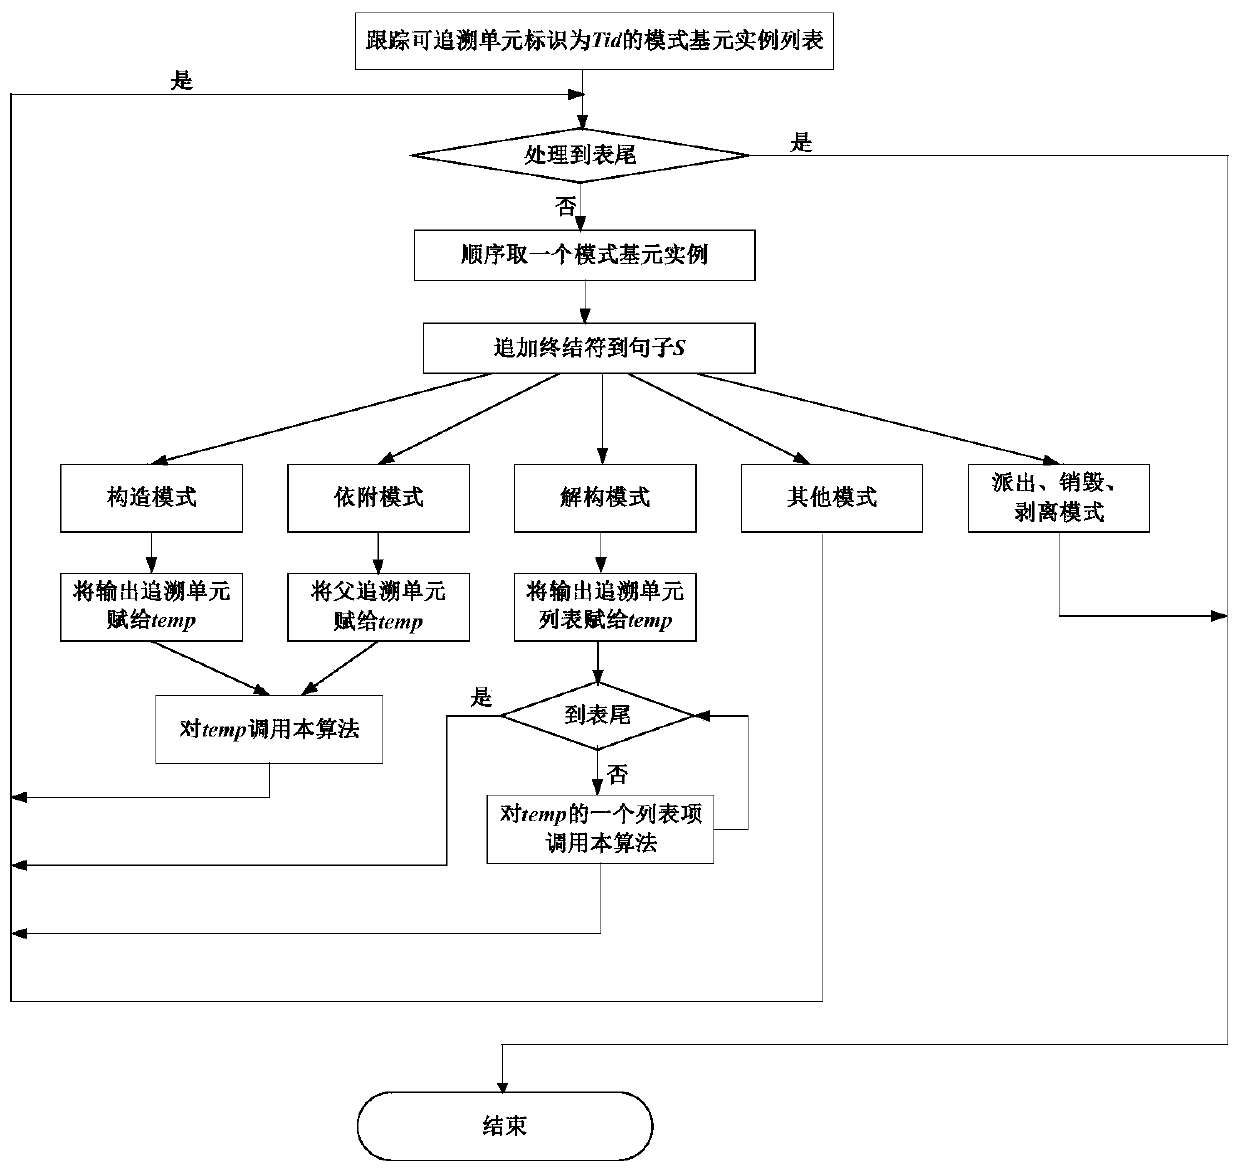 Traditional Chinese medicinal material quality tracing modeling method with gradable data granularity